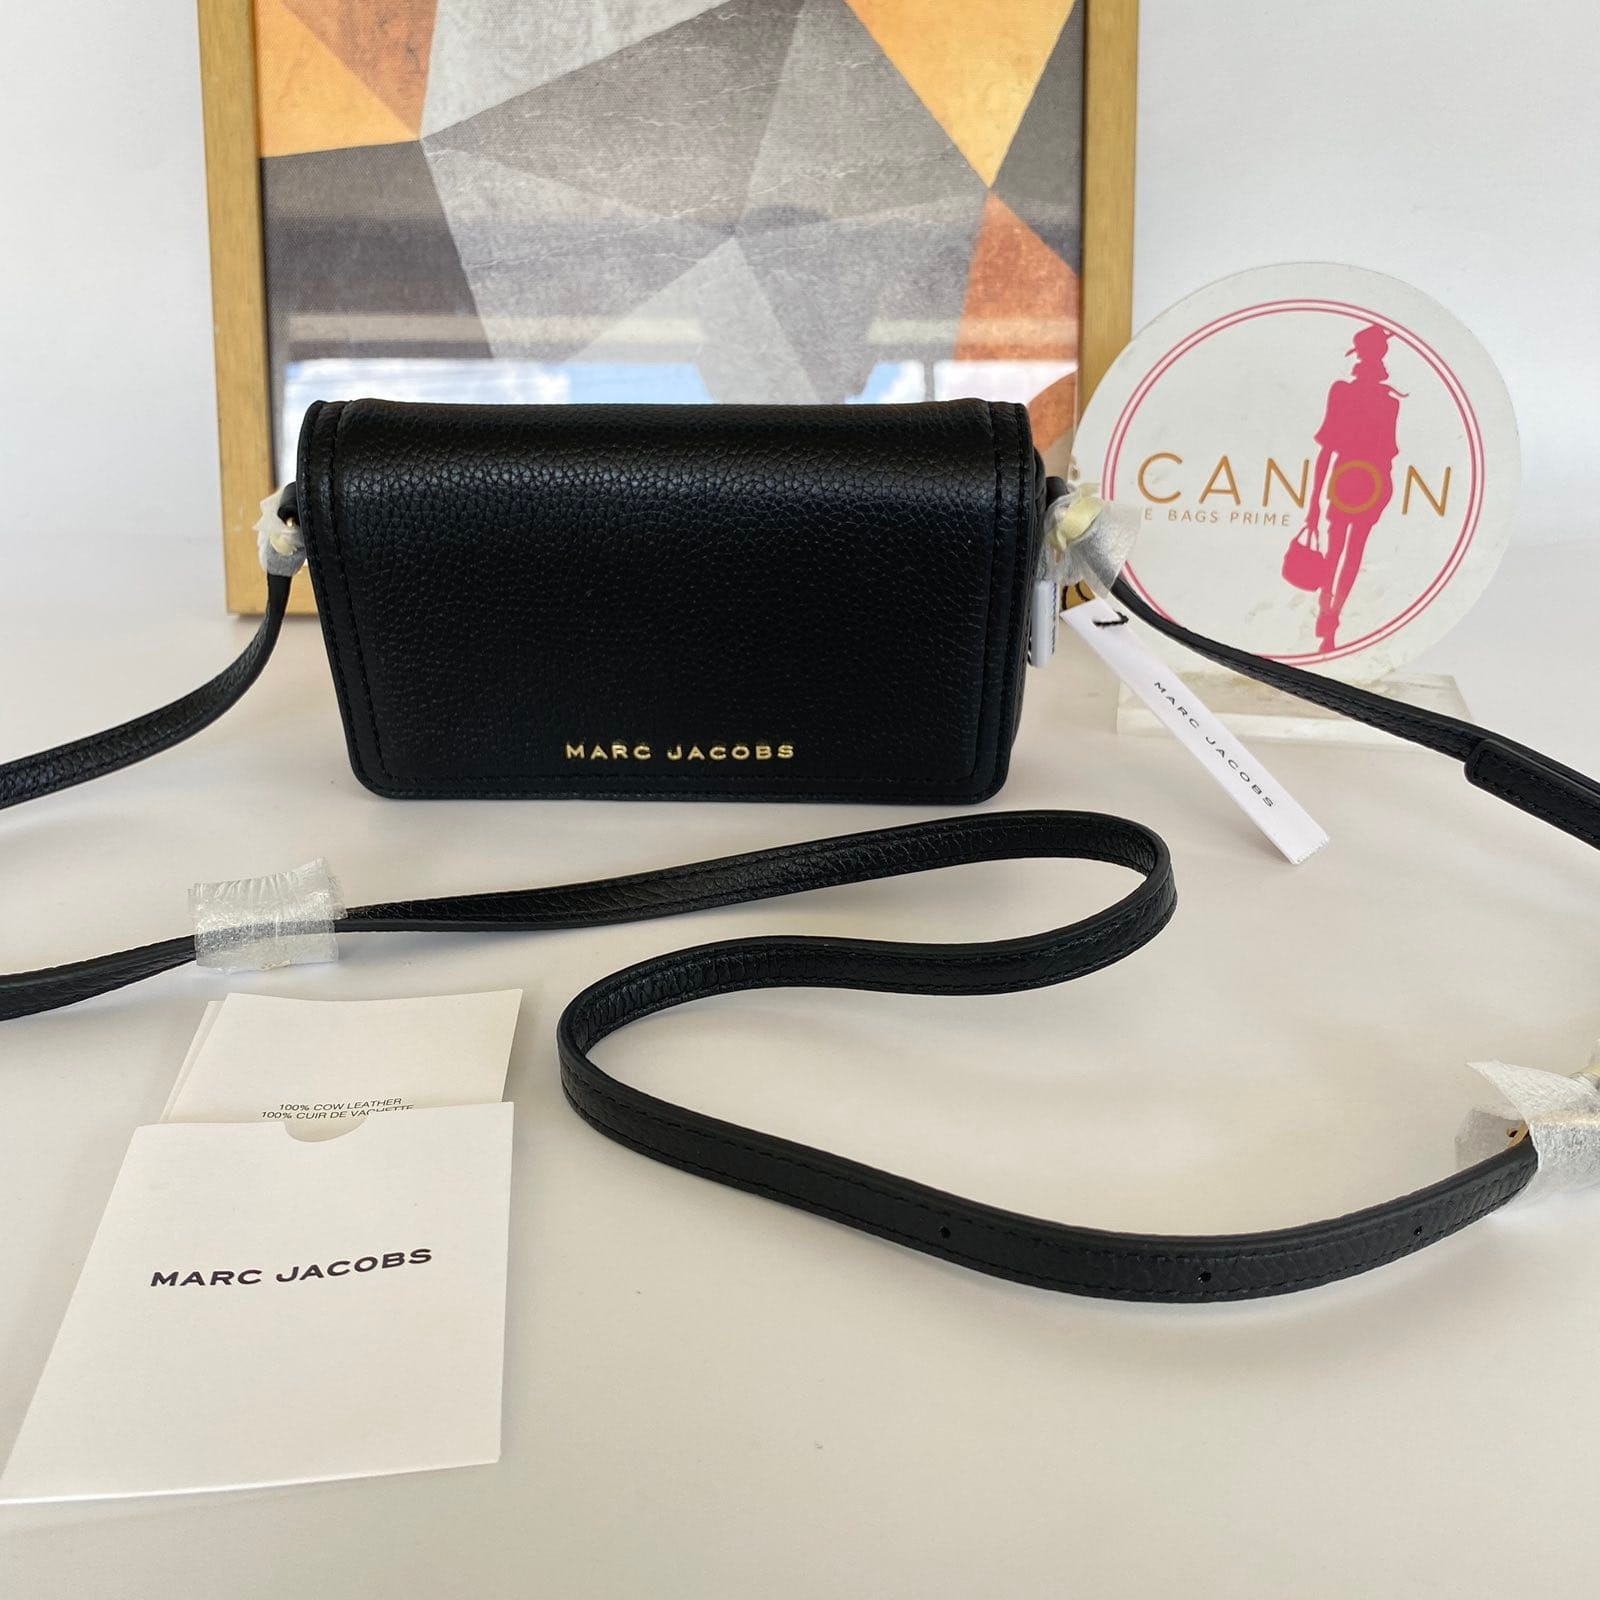 Marc Jacobs Black Leather Mini Wallet on Strap. Made in Vietnam.